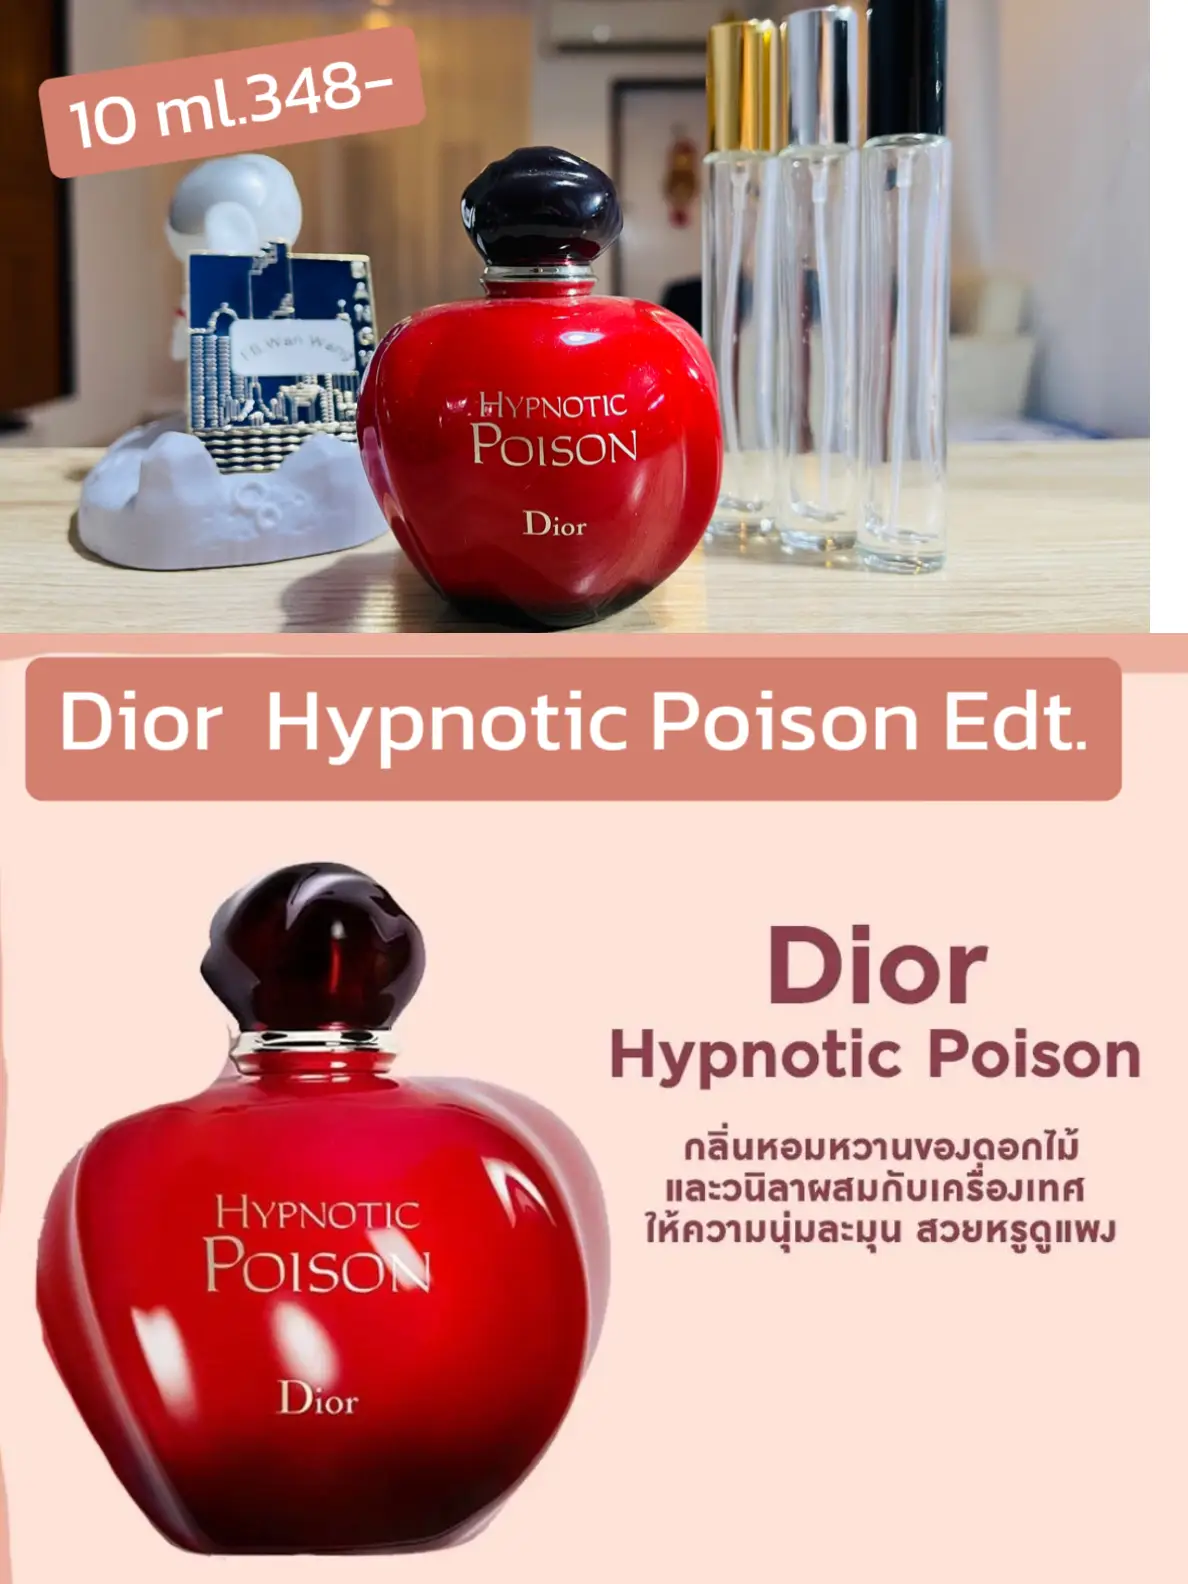 Dior Hypnotic Poison Edt., Gallery posted by Jaru